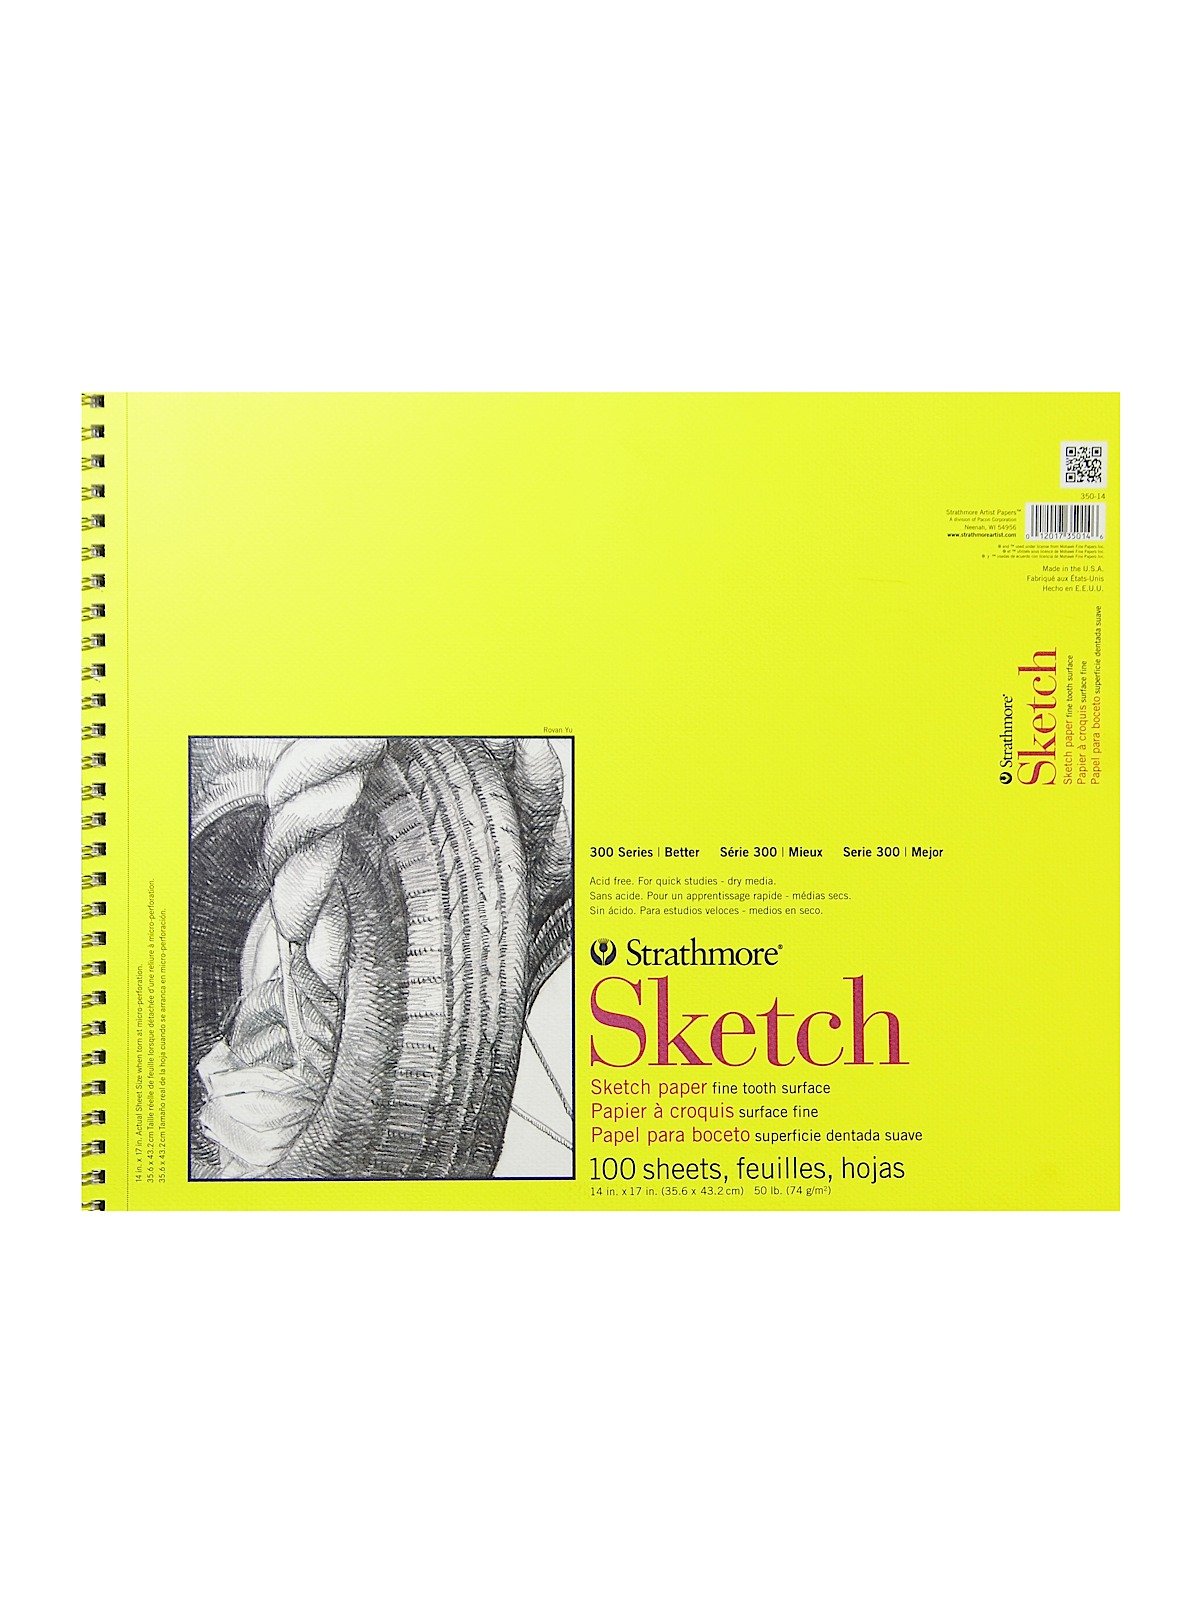 Strathmore® 300 Series Wired Drawing Paper Pad, 50 Sheets